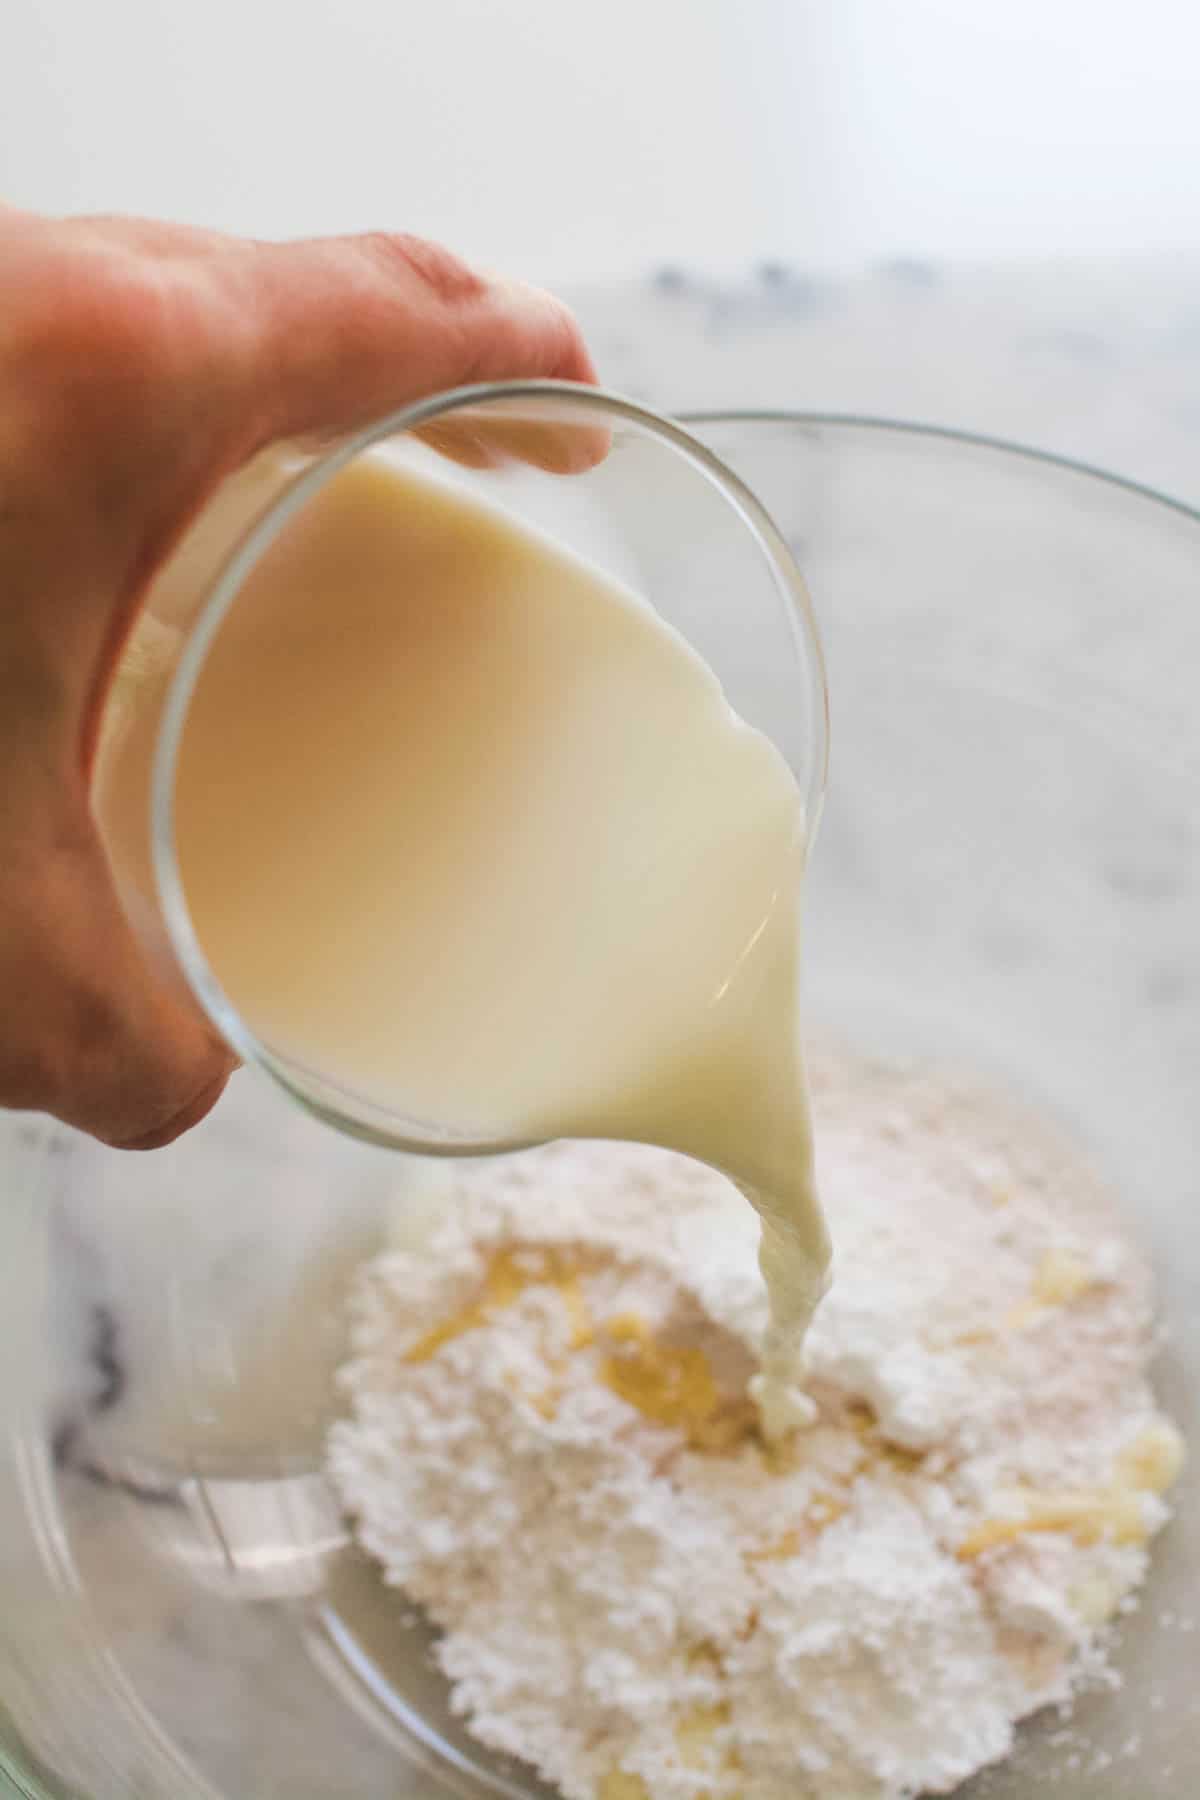 A hand pouring a glass of milk into a glass mixing bowl with powdered vanilla pudding.